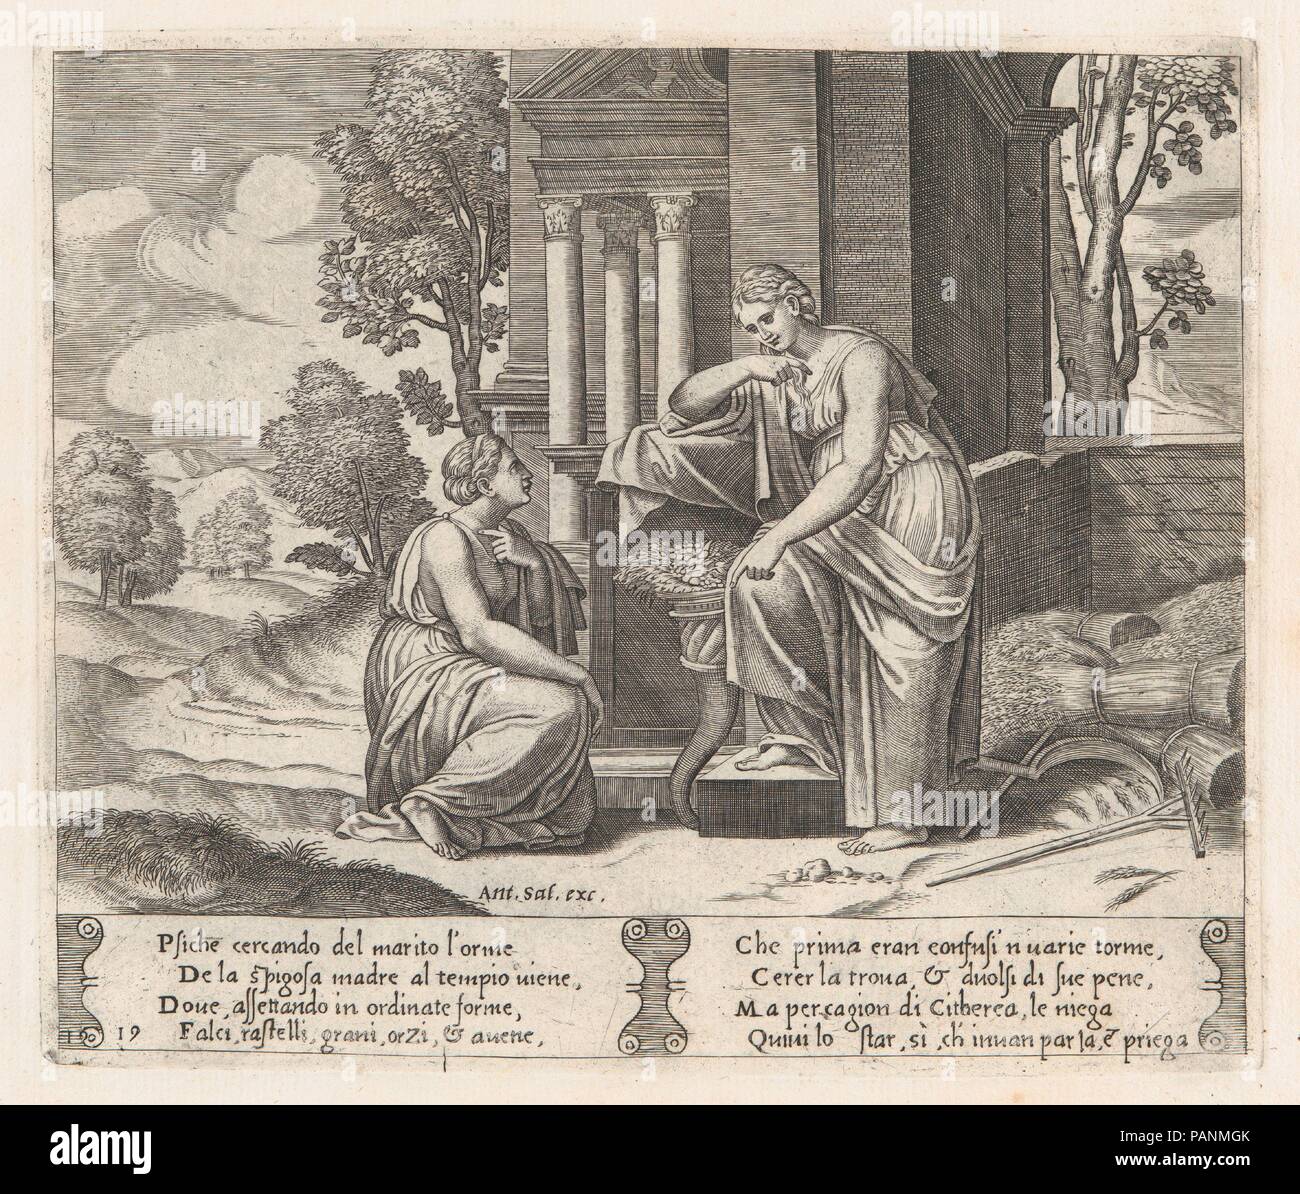 Plate 19: Ceres at right, leaning on a pedestal, refusing to assist Psyche, from the Story of Cupid and Psyche as told by Apuleius. Artist: Master of the Die (Italian, active Rome, ca. 1530-60); After Michiel Coxie (I) (Netherlandish, Mechelen ca. 1499-1592 Mechelen). Dimensions: Sheet: 10 1/4 × 15 13/16 in. (26 × 40.2 cm)  Plate: 7 7/8 × 9 3/16 in. (20 × 23.4 cm). Publisher: Antonio Salamanca (Salamanca 1478-1562 Rome). Series/Portfolio: The Story of Cupid and Psyche as told by Apuleius. Date: 1530-60.  This book contains 32 plates bound together, 3 of which are by Agostino Veneziano. Museum: Stock Photo